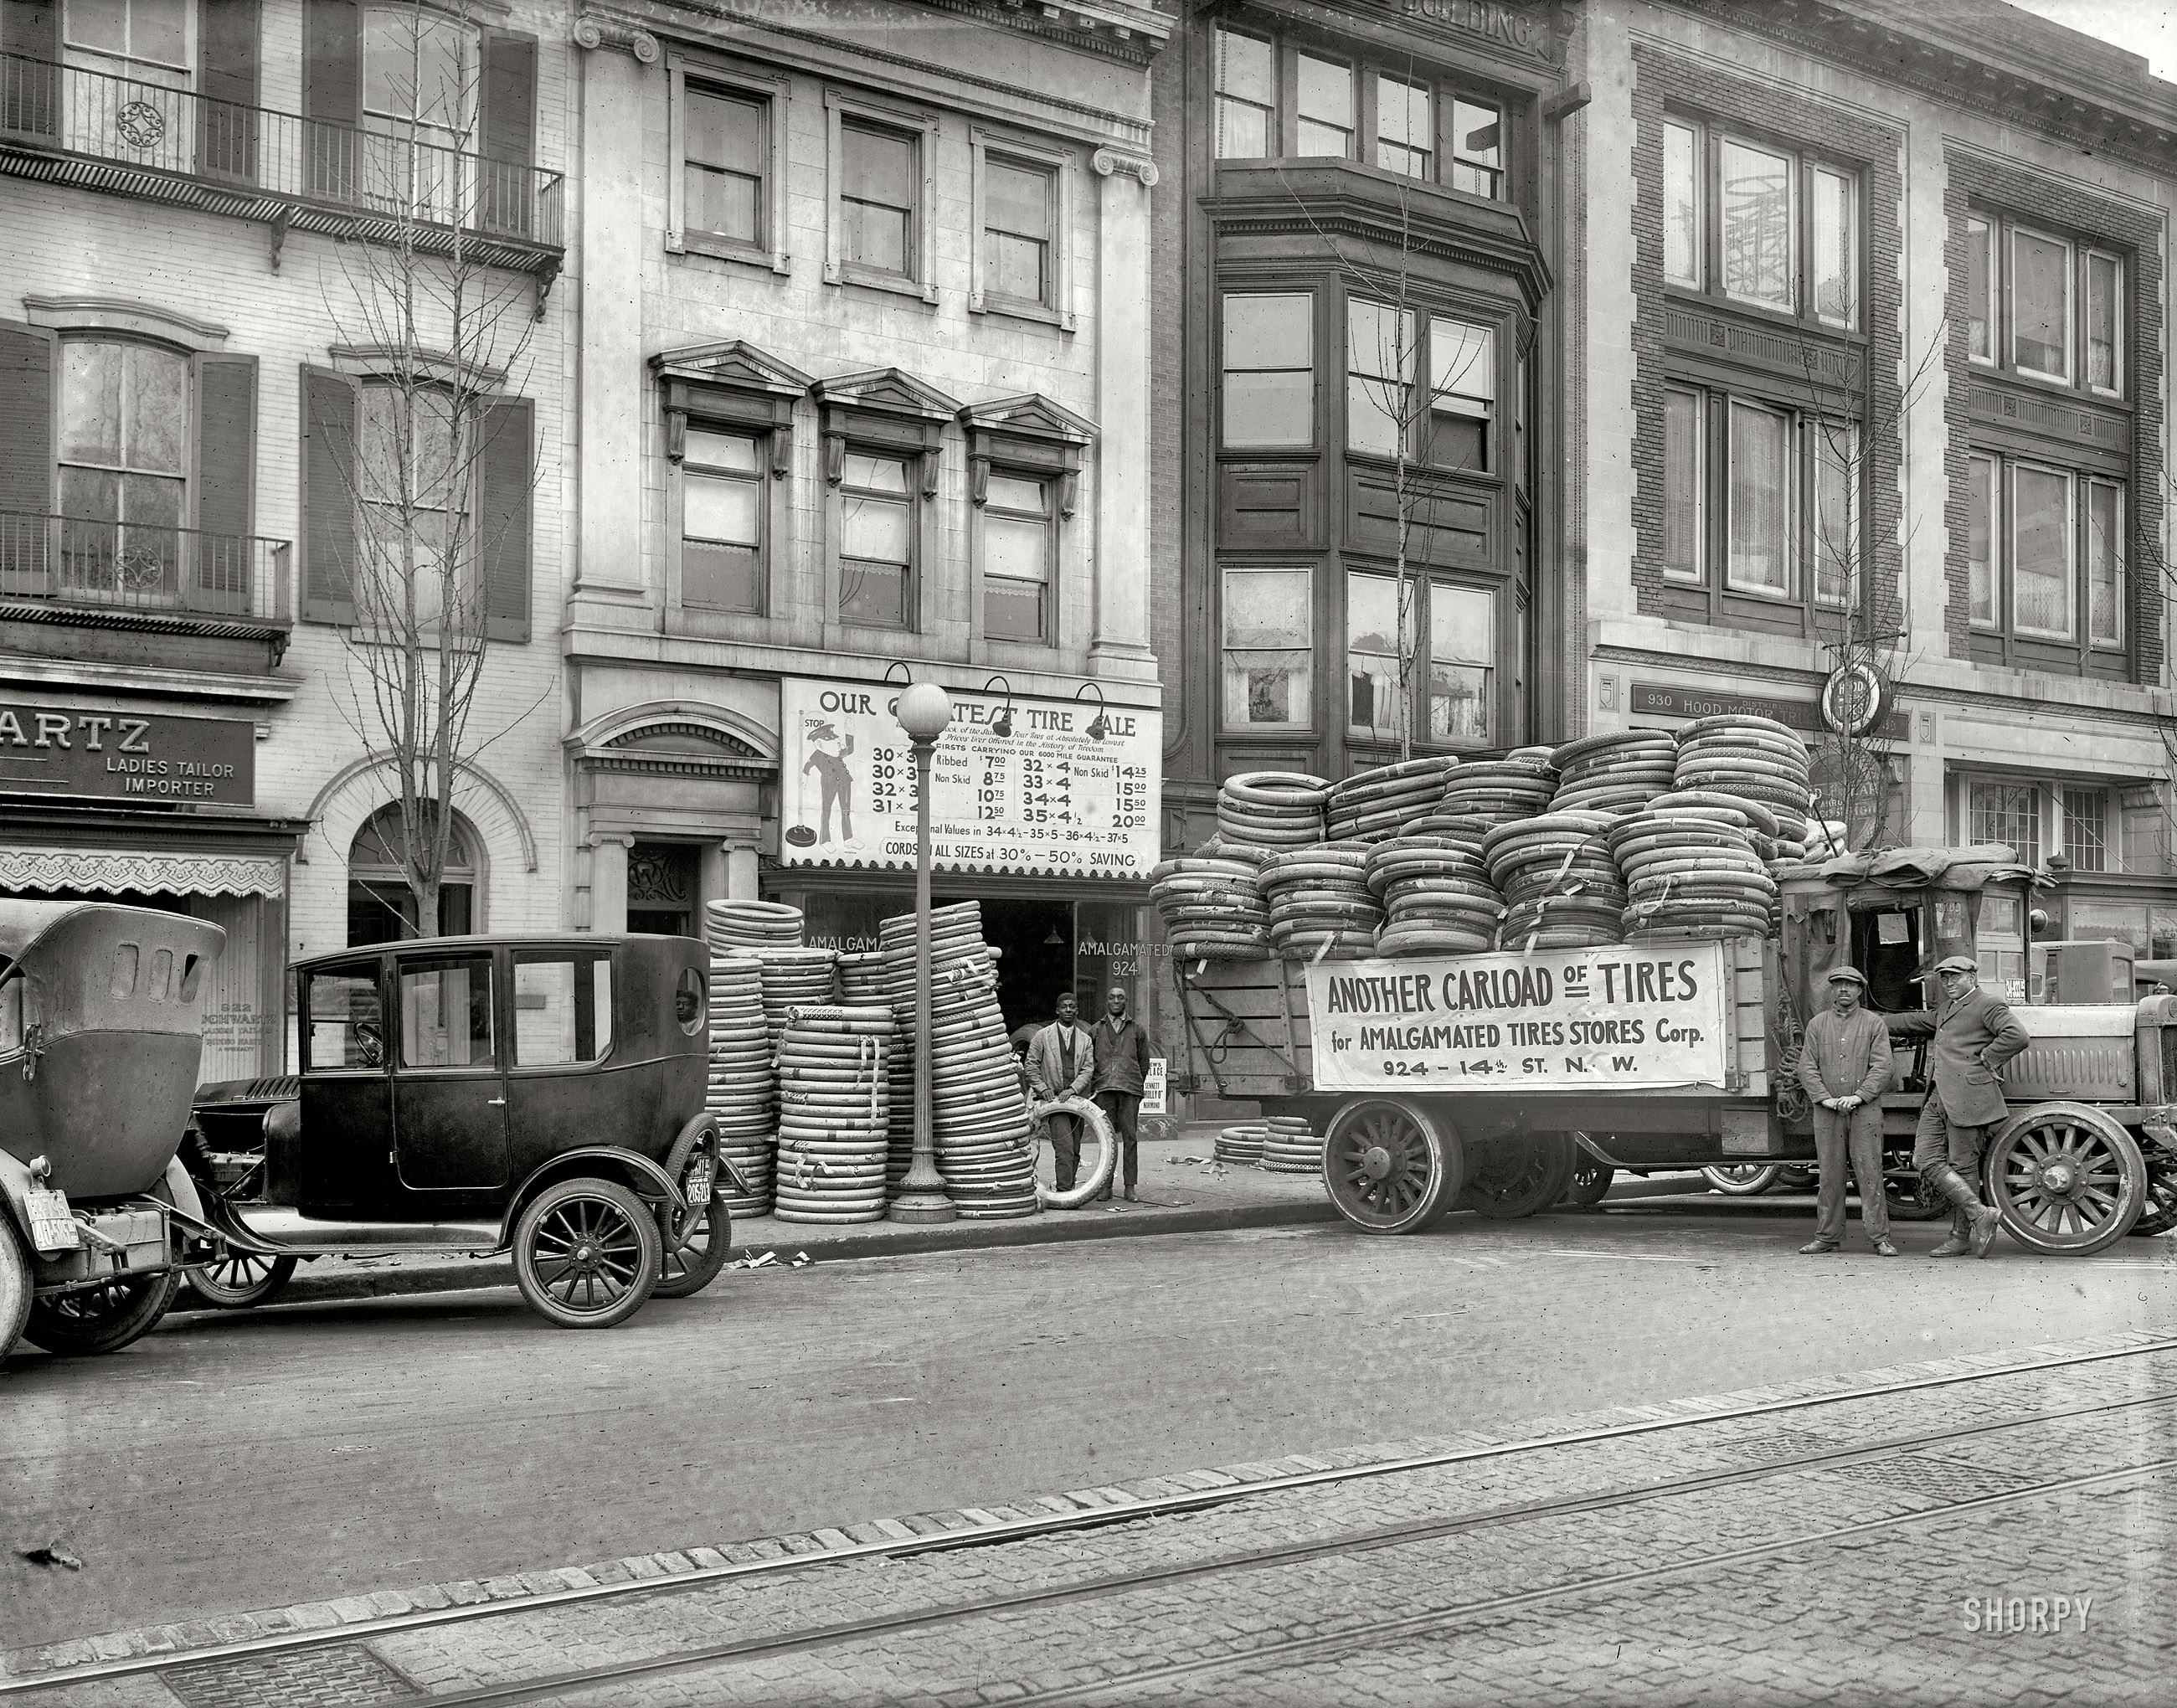 Washington, D.C., circa 1922. "Amalgamated Tires, 14th Street N.W." Hurry on down for our BIG SALE! National Photo Co. glass negative. View full size.